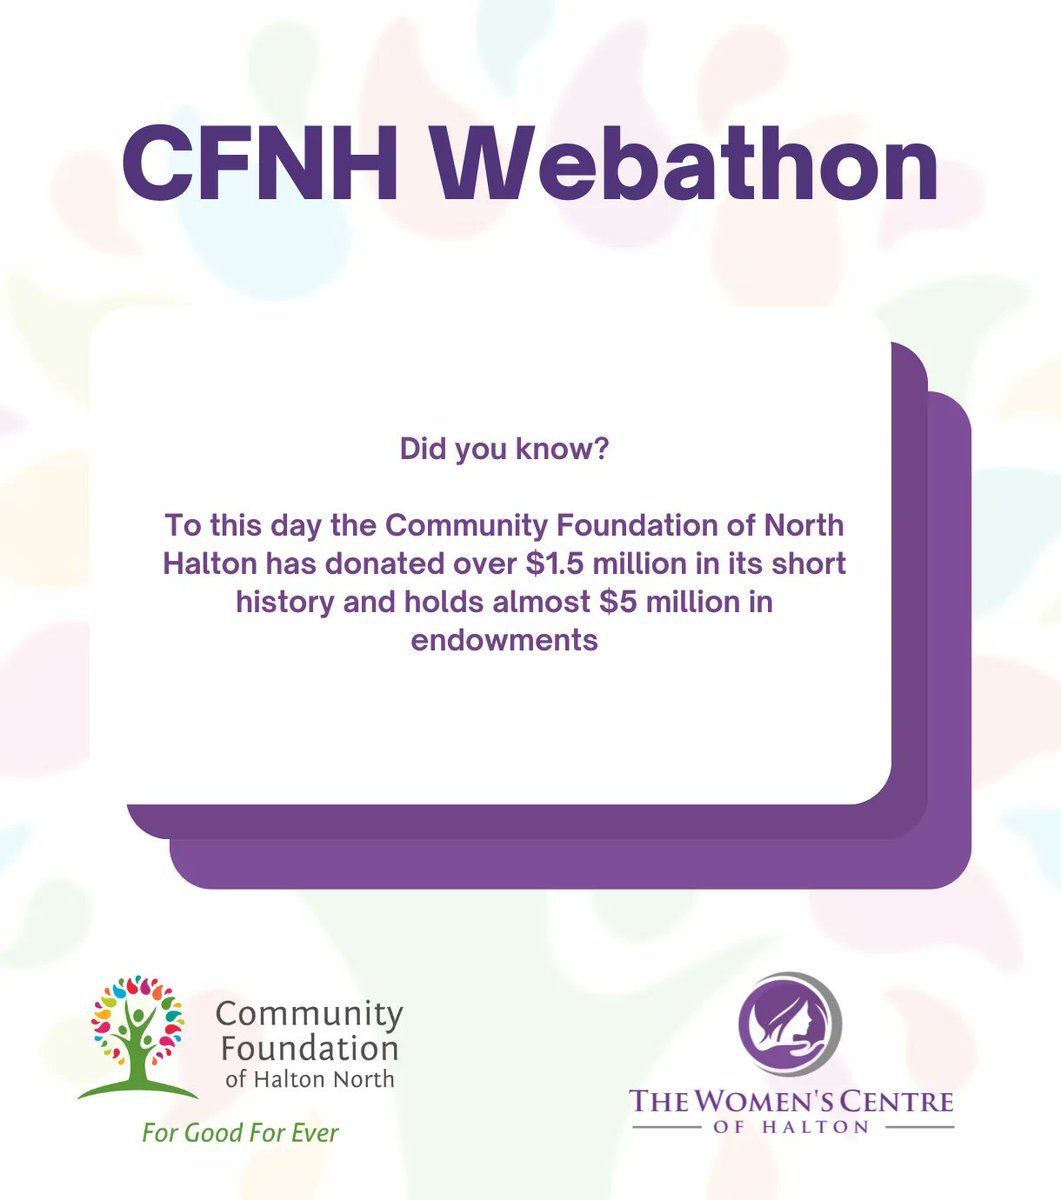 Don’t forget to join the CFNH on September 30th, 2023 from 9:00am - 12:00pm for their third annual webathon! Learn how you can make a difference and donate to charities in your community today! 

Register today: us02web.zoom.us/webinar/regist… 

#CFHNWebathon2023 #forgoodforever